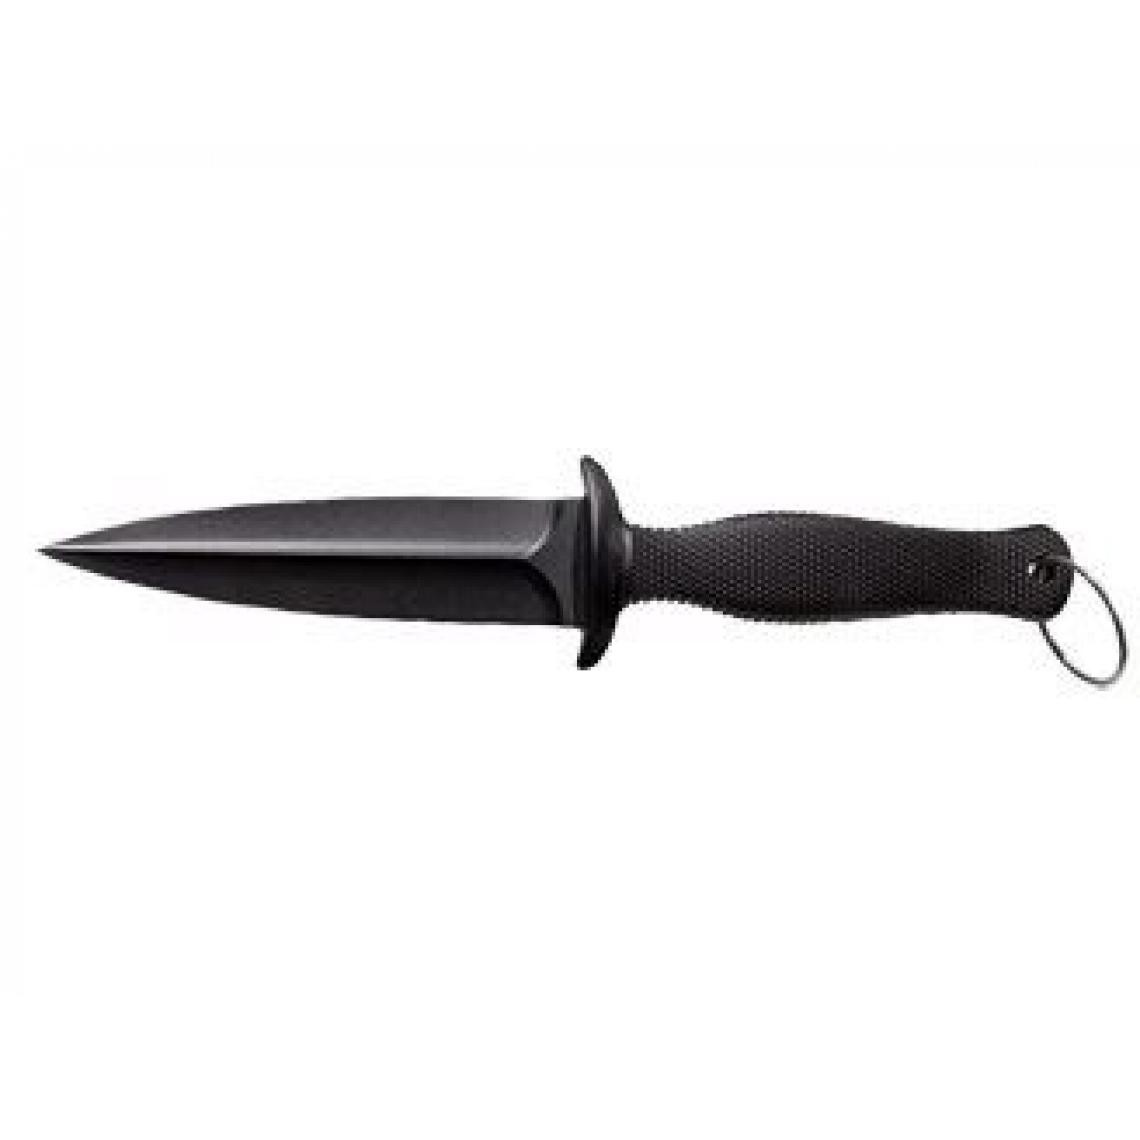 Divers Marques - Cold Steel FGX BOOT BLADE I 92FBA - Outils de coupe